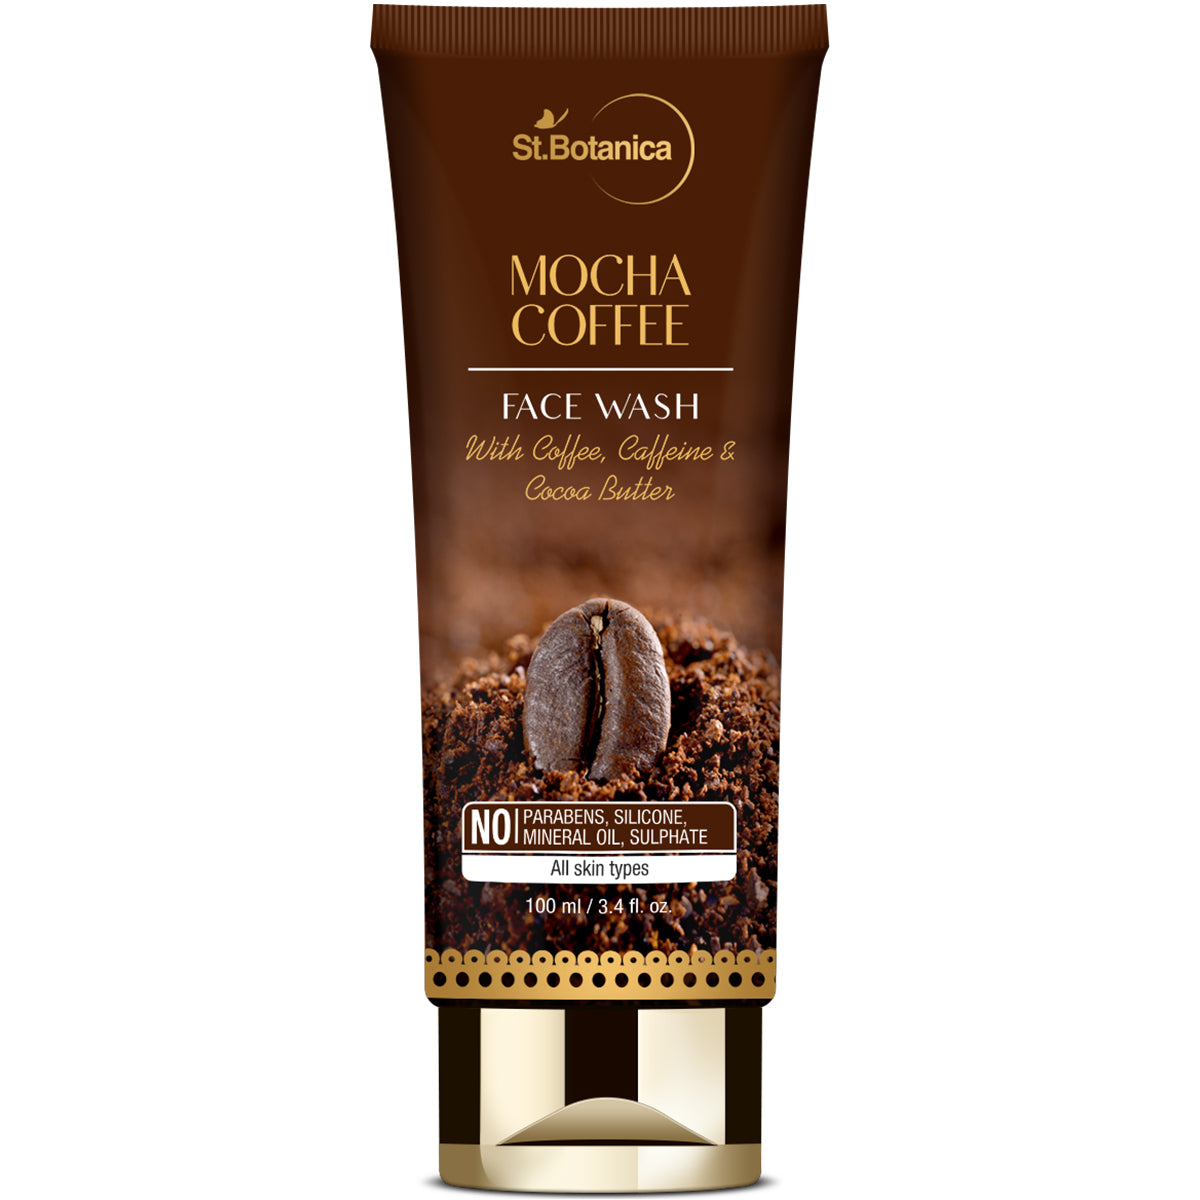 St.Botanica Mocha Coffee Face Wash With Coffee, Caffeine and Cocoa Butter No Sls, Paraben, 100 ml (STBOT698)